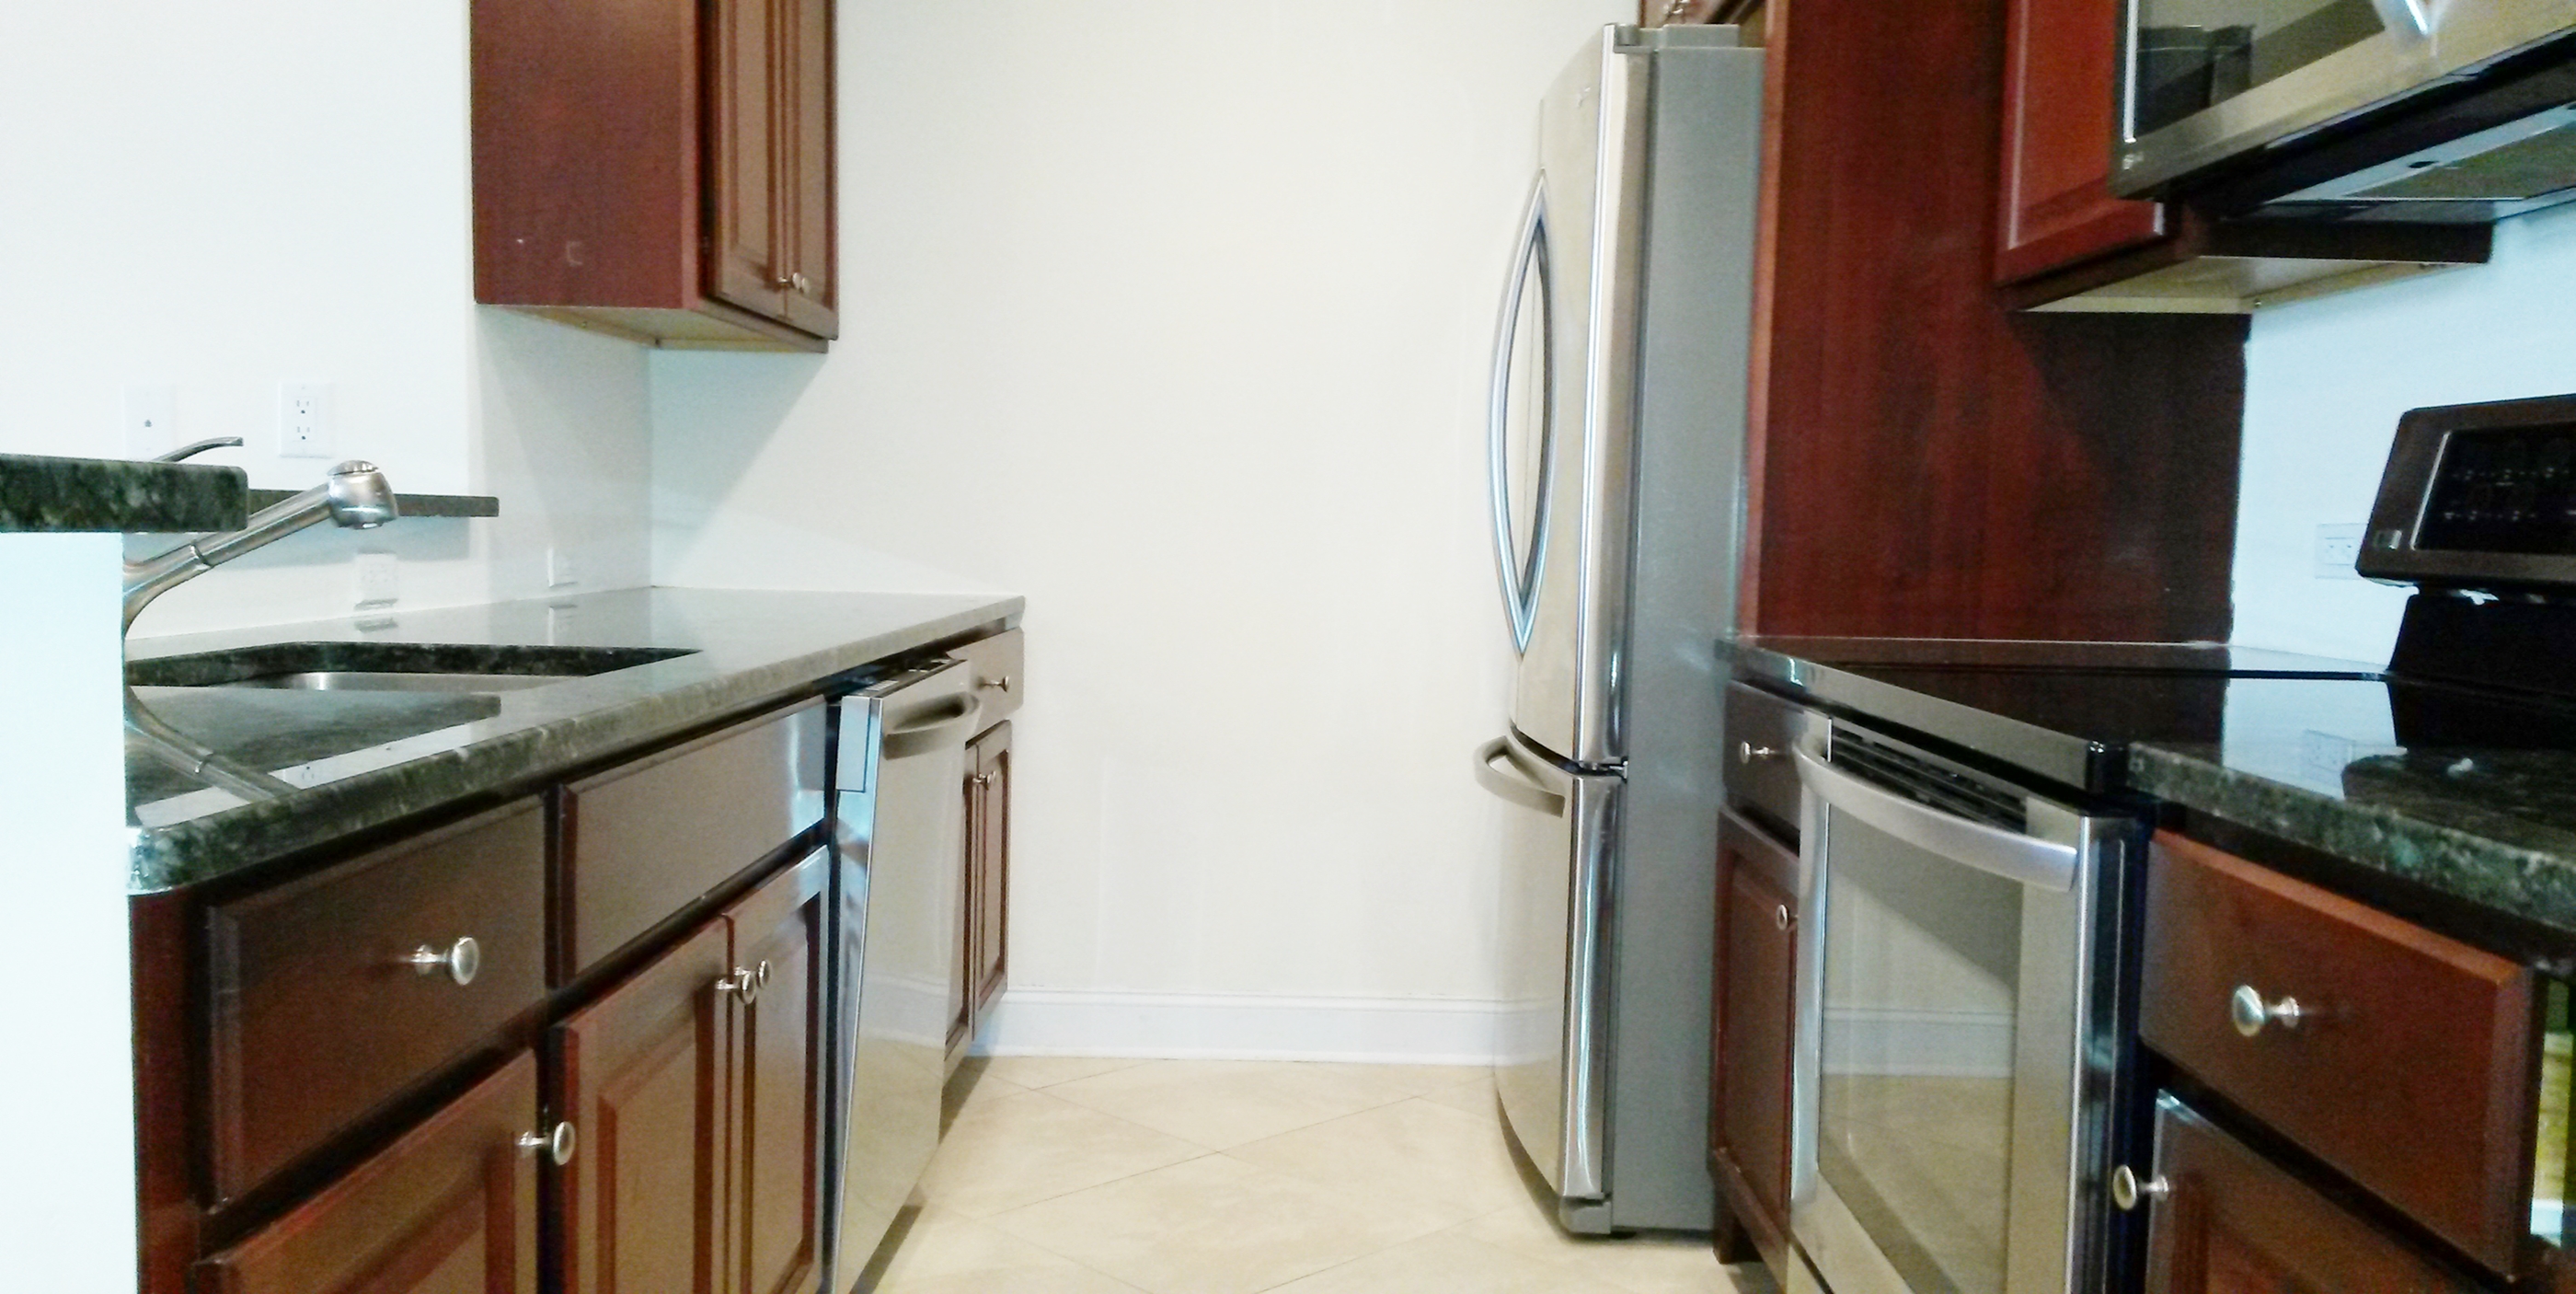 101 Clinton St, Brooklyn, NY, 2 Bedrooms Bedrooms, 5 Rooms Rooms,2 BathroomsBathrooms,Apartment,For Rent,Clinton St,5,1181